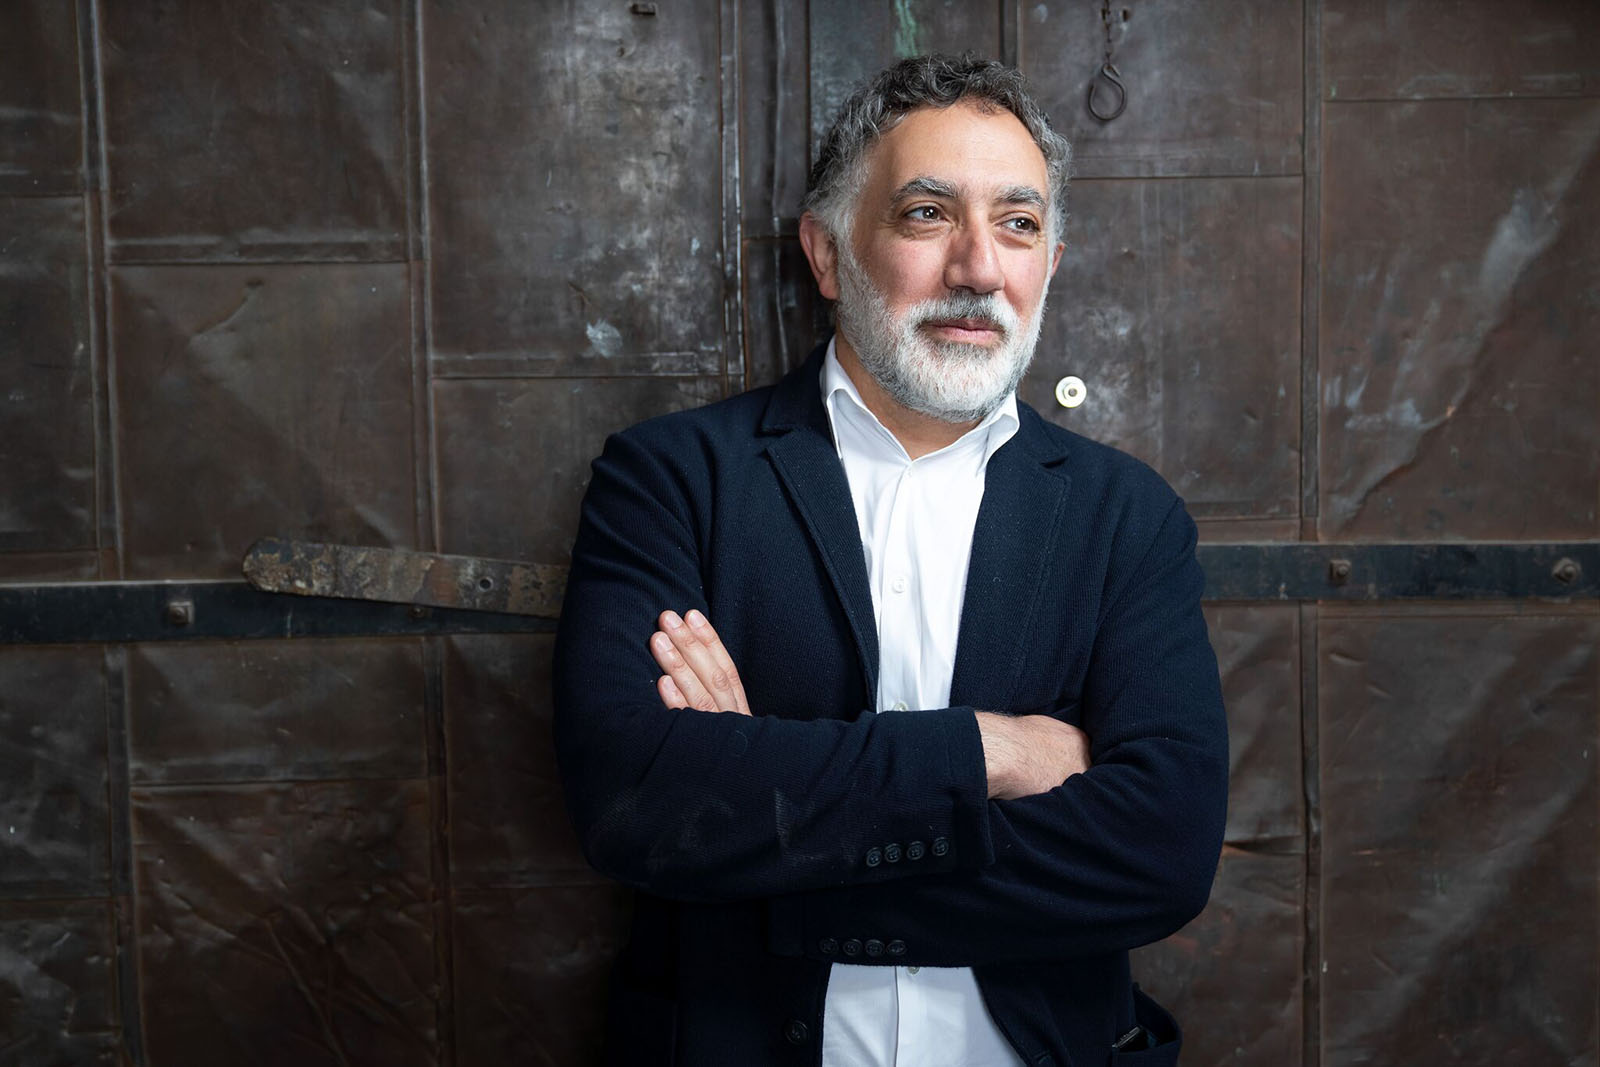 Archisearch Hashim Sarkis appointed curator of Biennale Architettura 2020